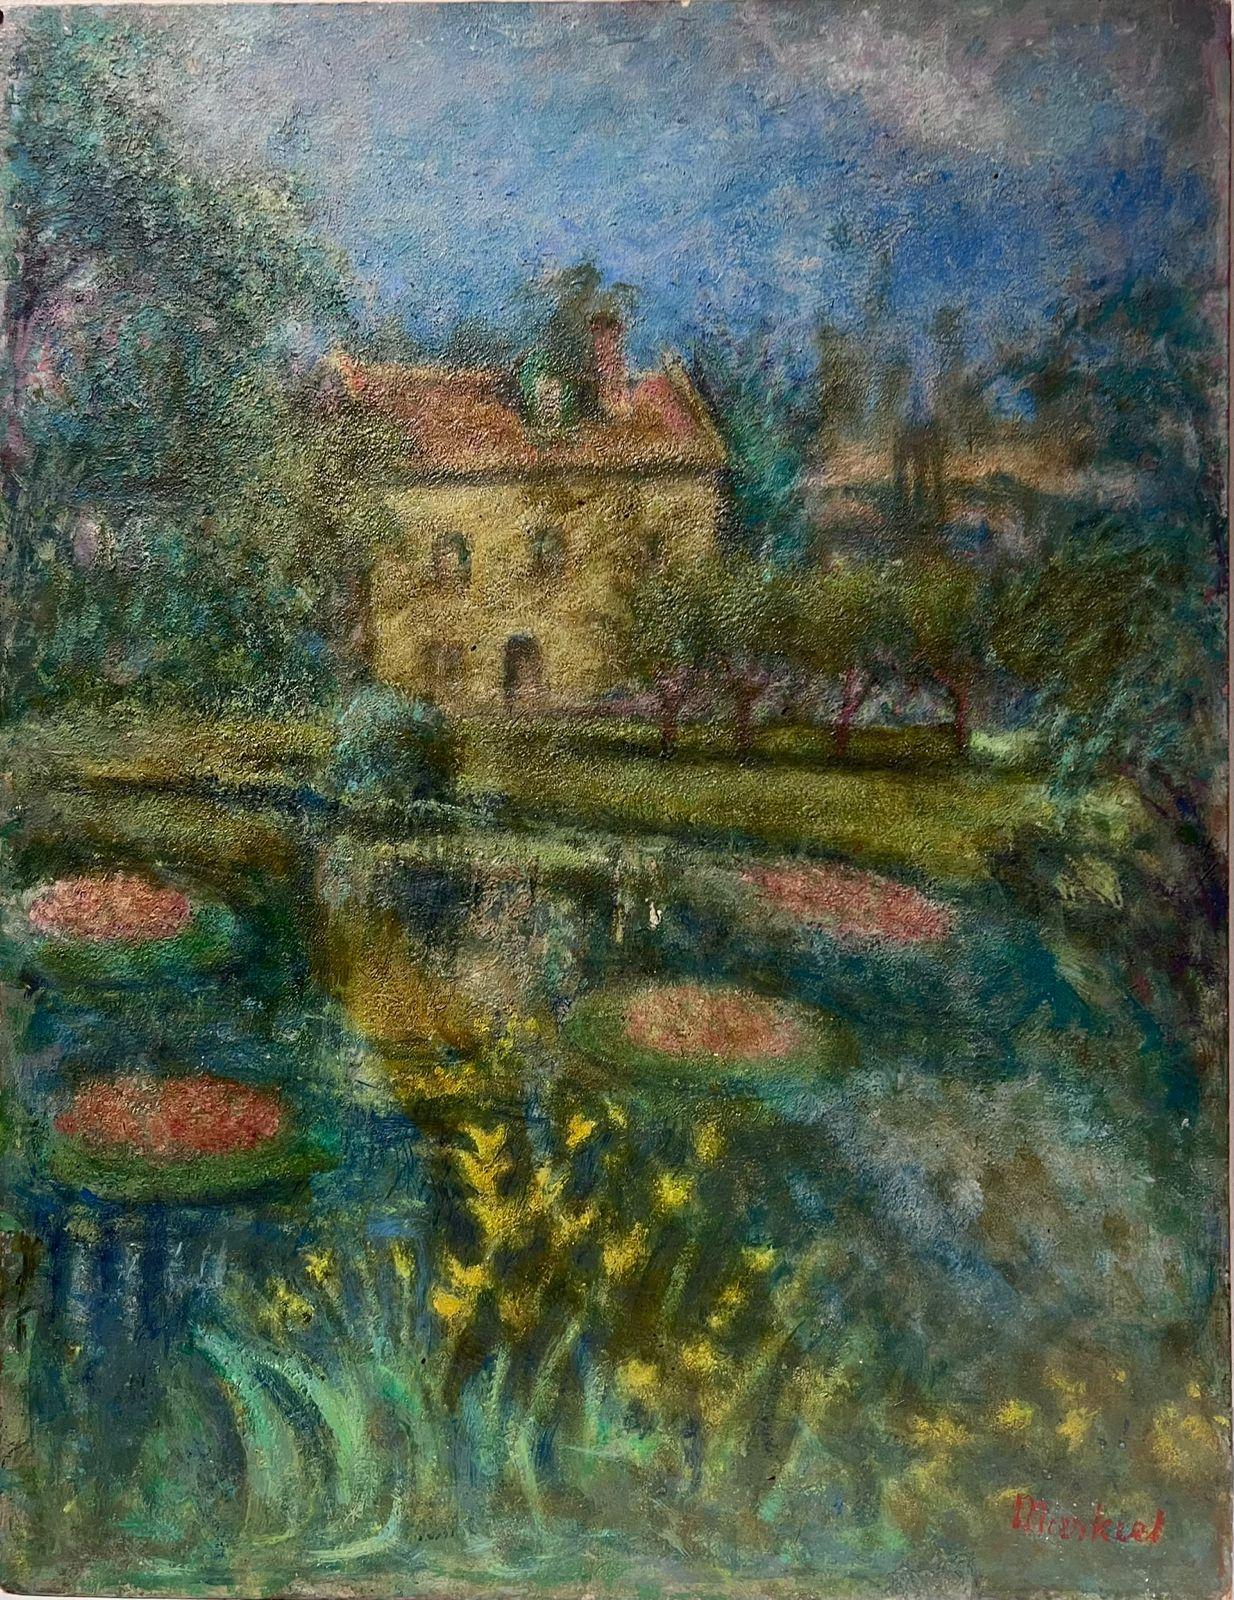 Jacob Markiel Landscape Painting - The Lily Pond 20th Century Modernist Oil Painting by Listed Polish artist